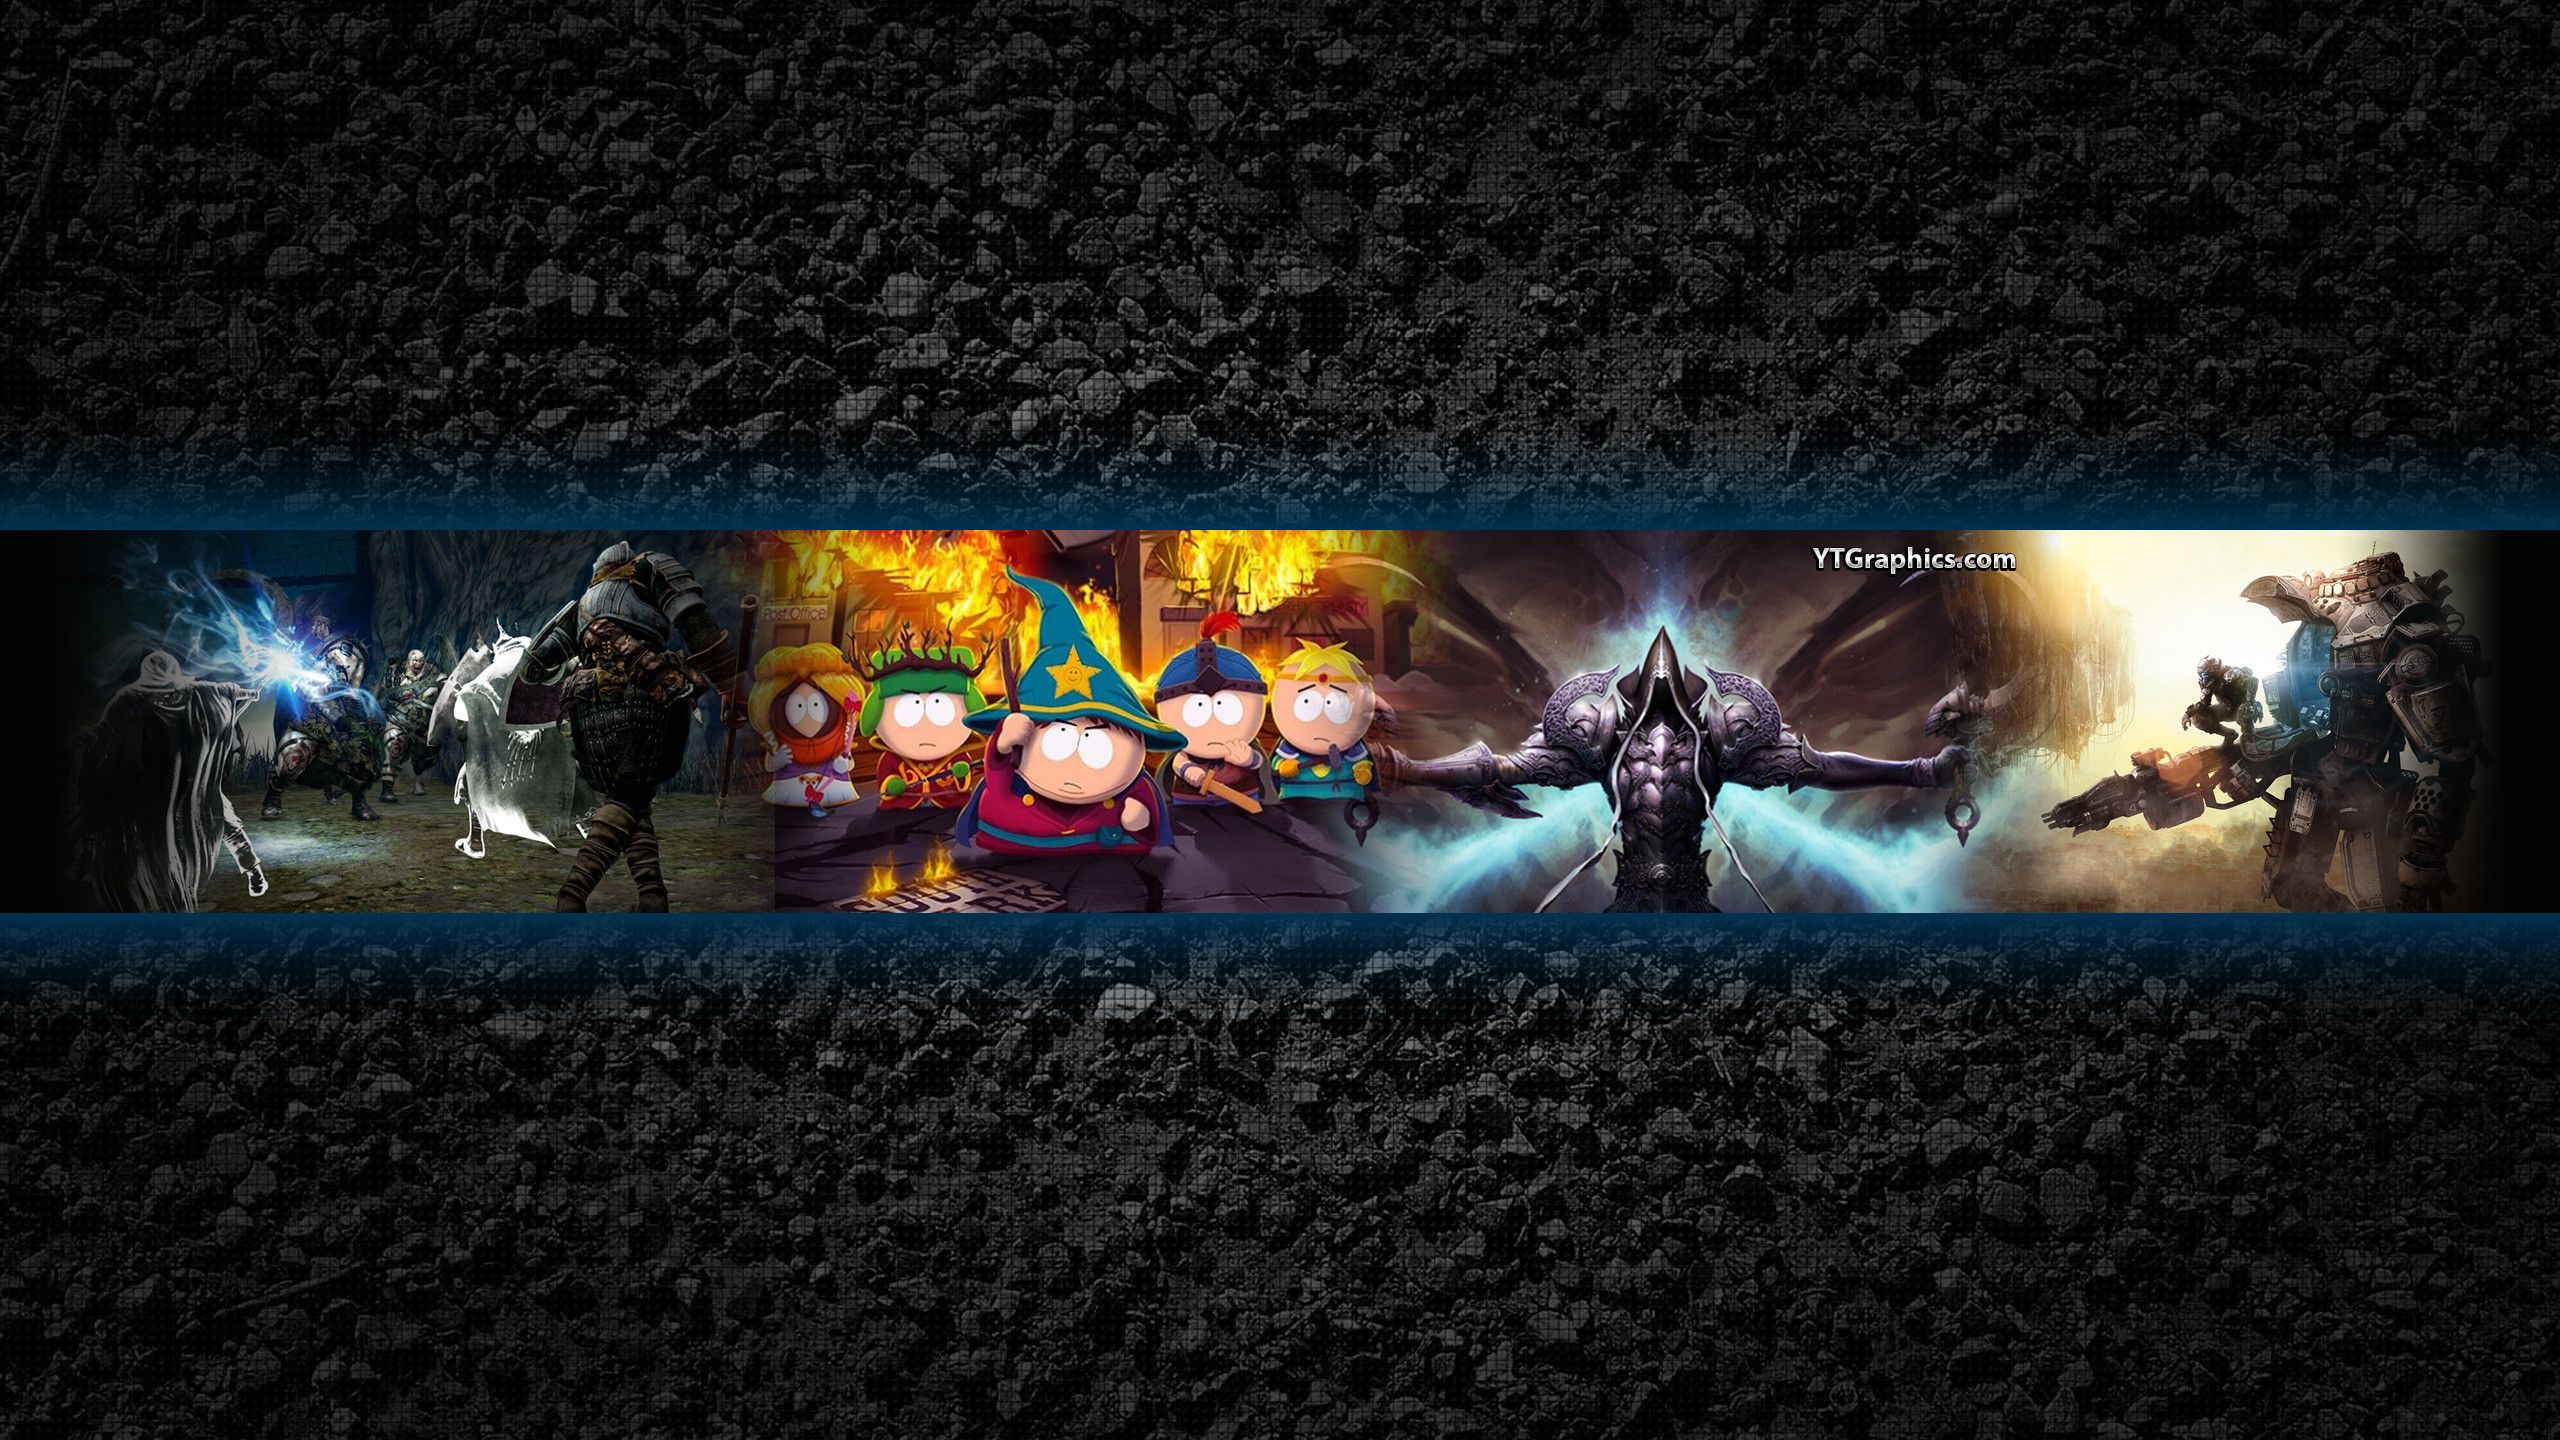 YouTube Banners Wallpapers - Wallpaper Cave